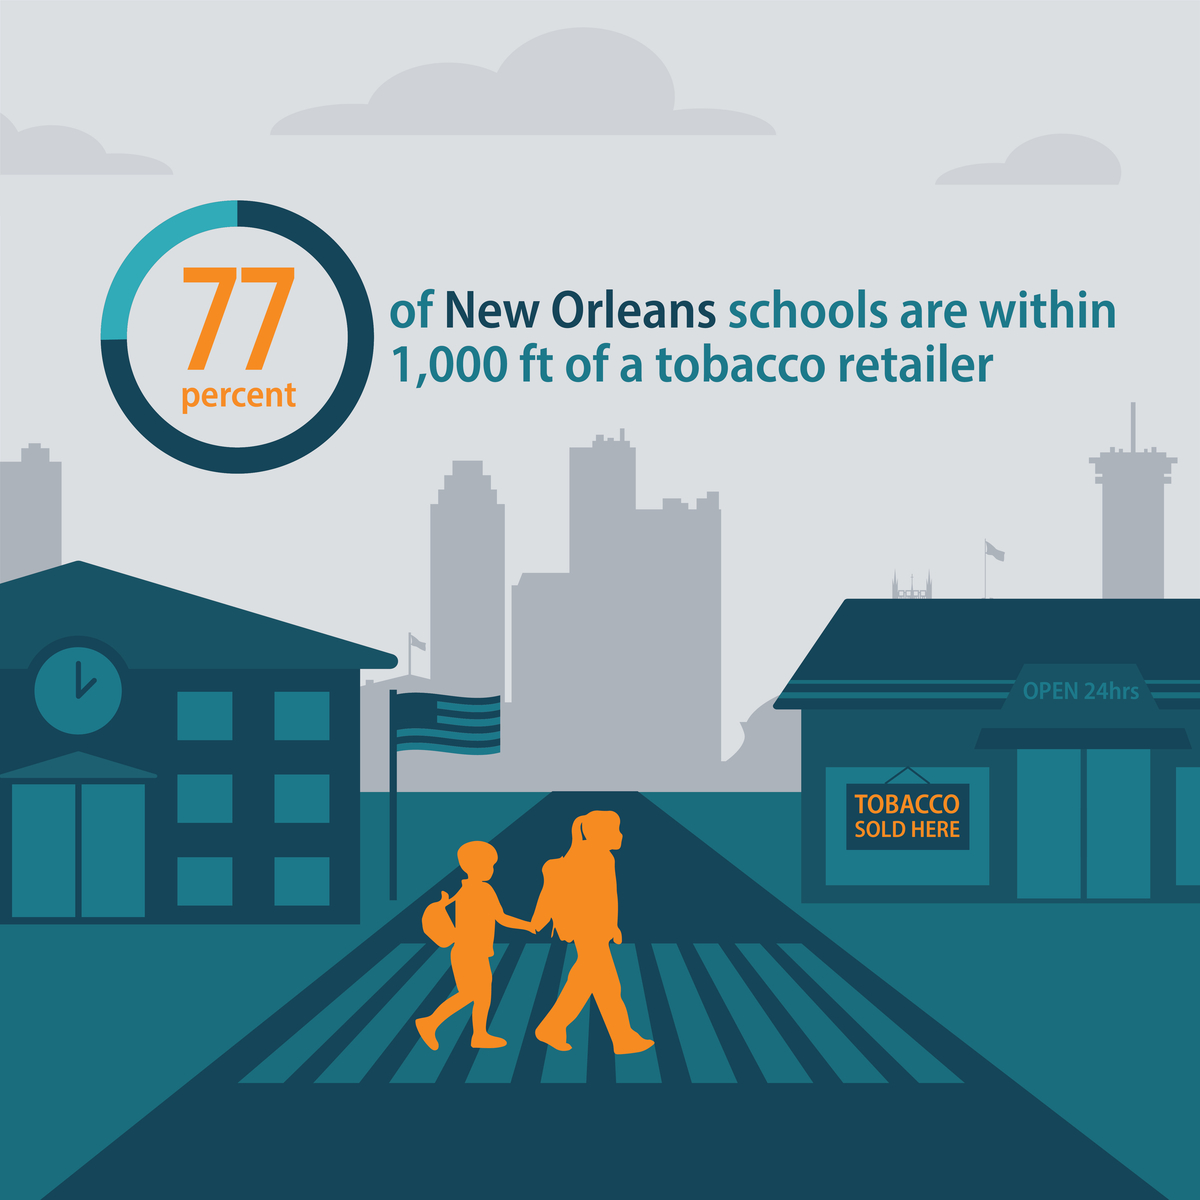 77 percent of New Orleans schools are within 1,000 feet of a tobacco retailer